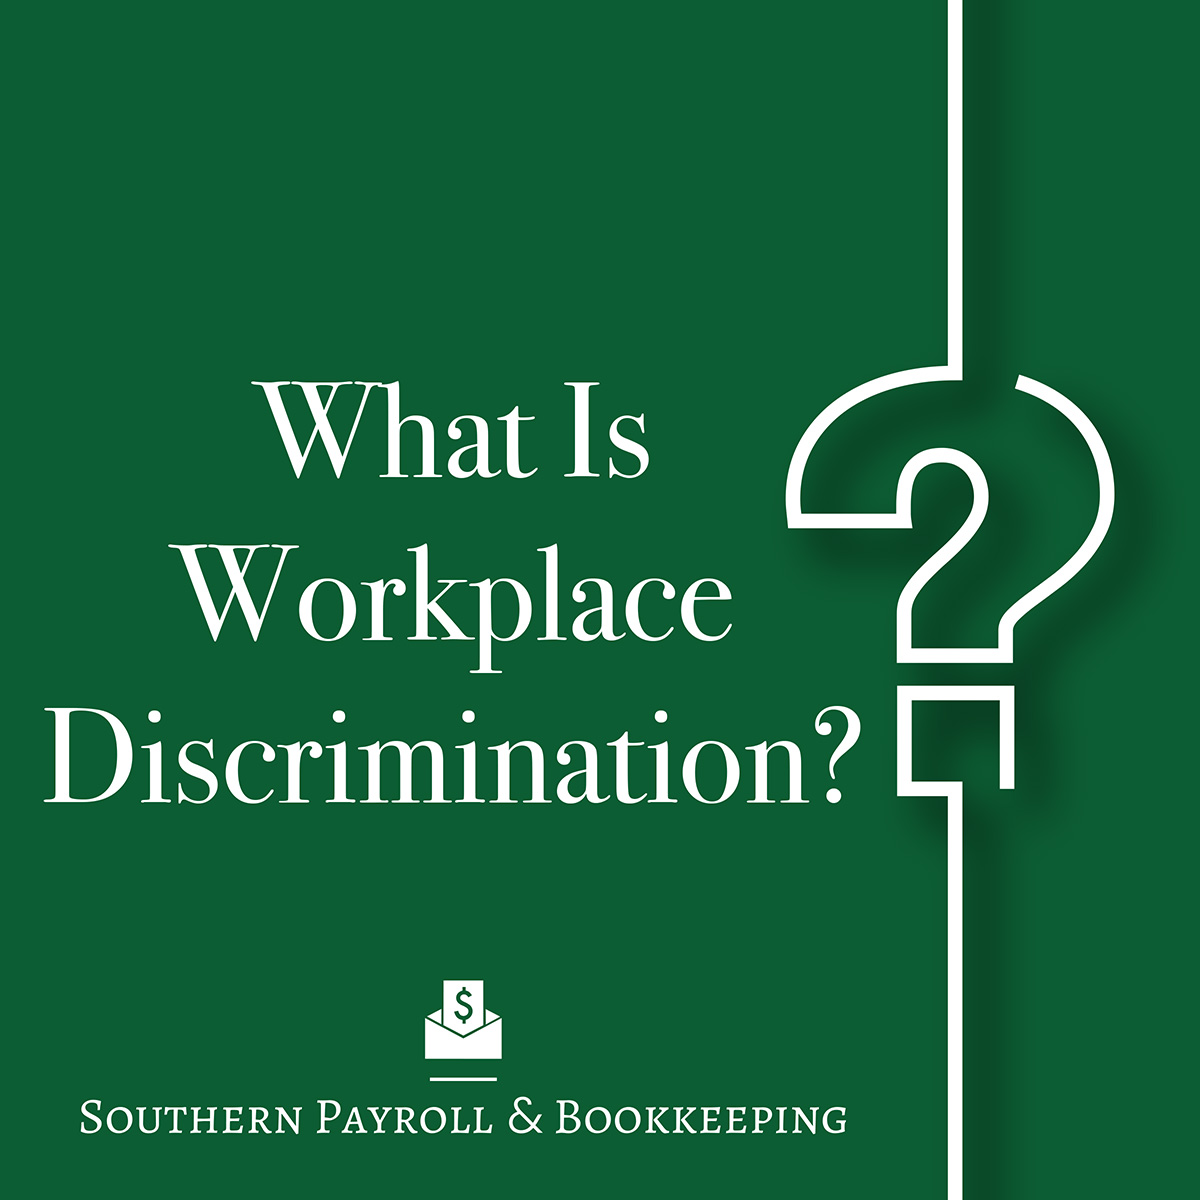 What Is Workplace Discrimination?